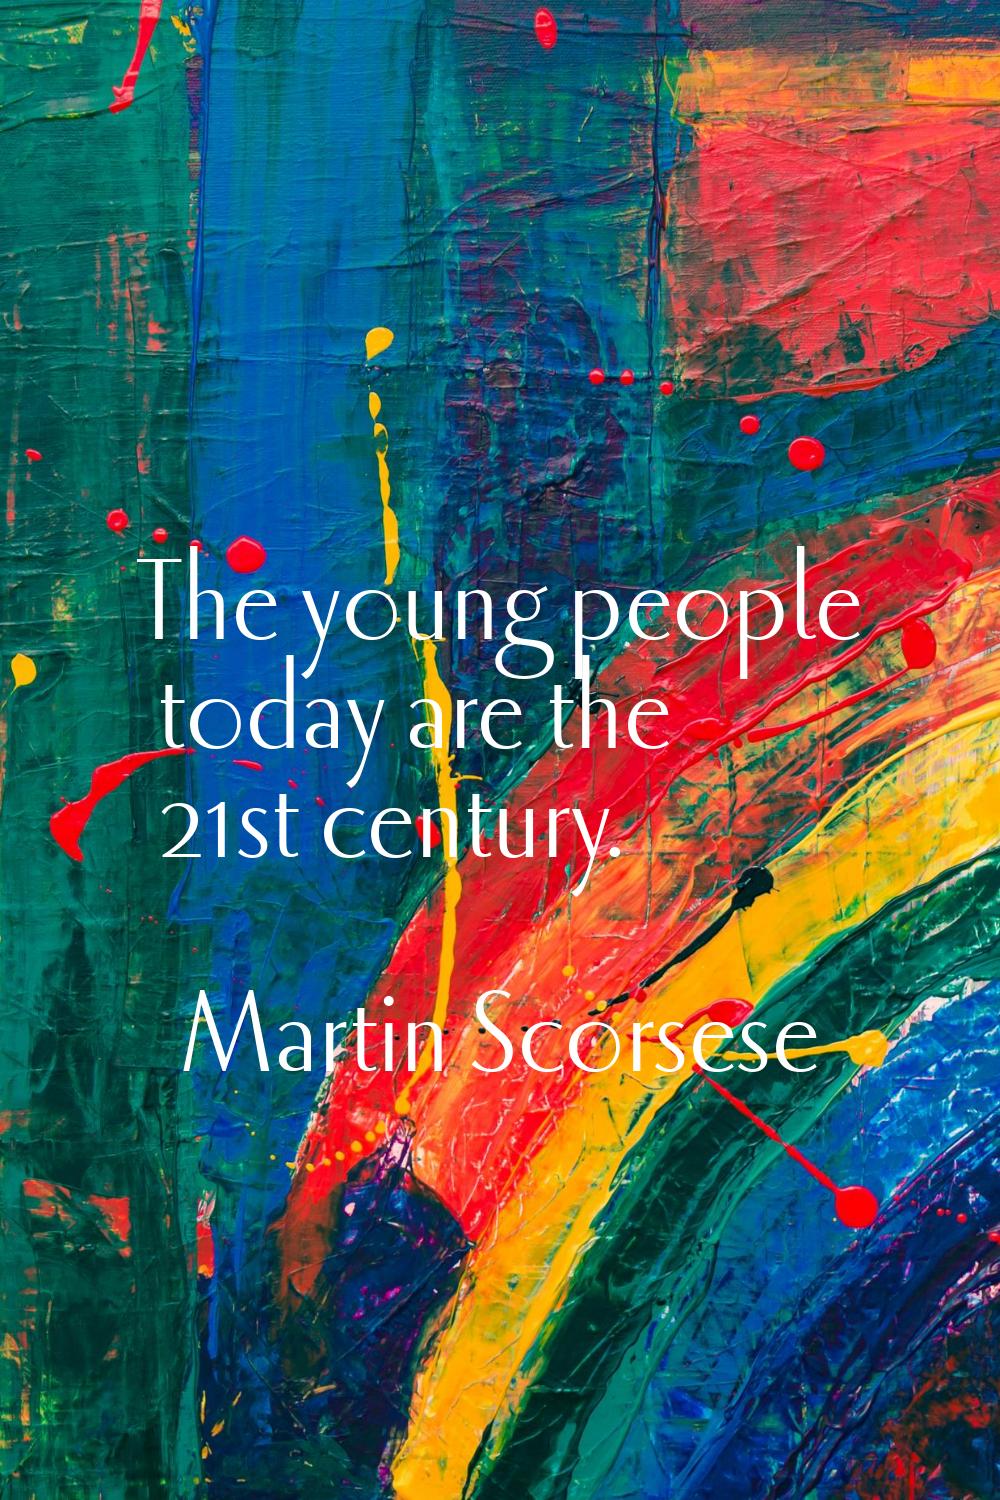 The young people today are the 21st century.